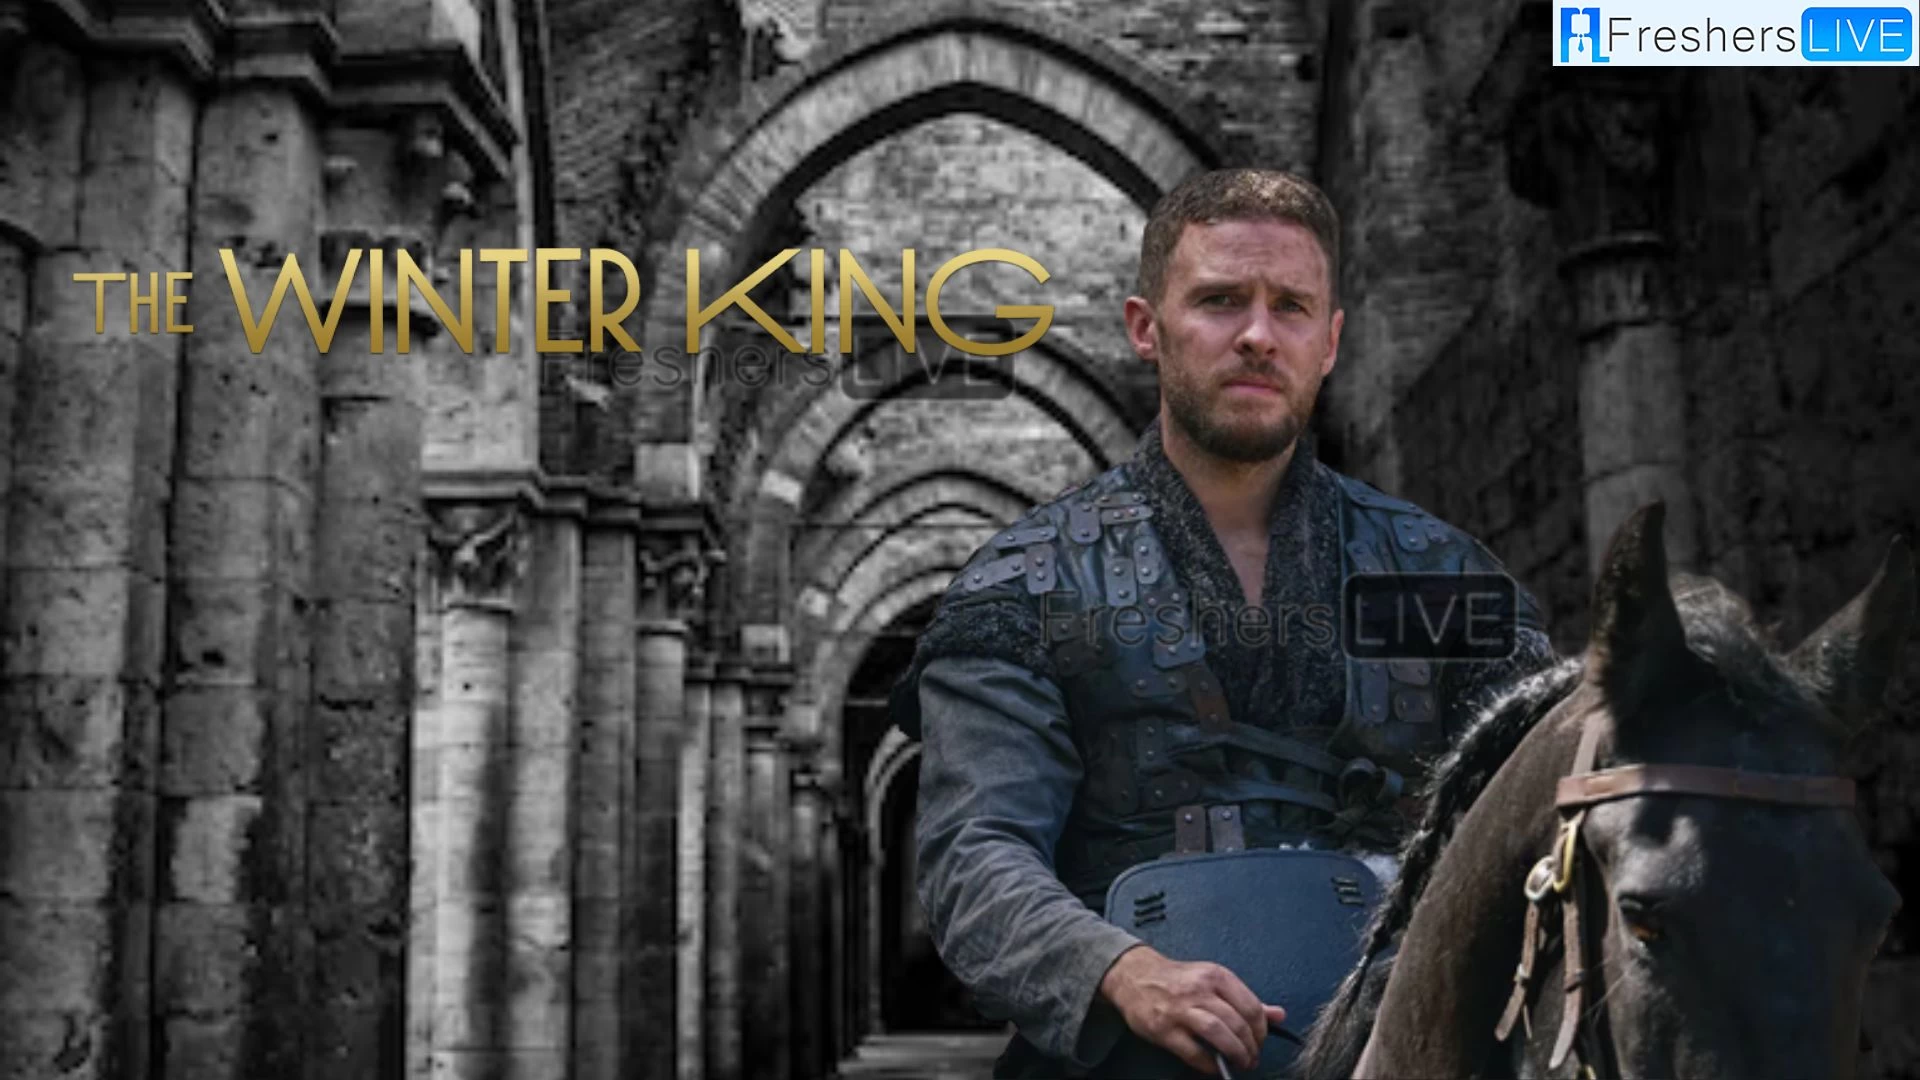 The Winter King Season 1 Episode 5 Ending Explained, Release Date, Plot, Cast, Where to Watch and More